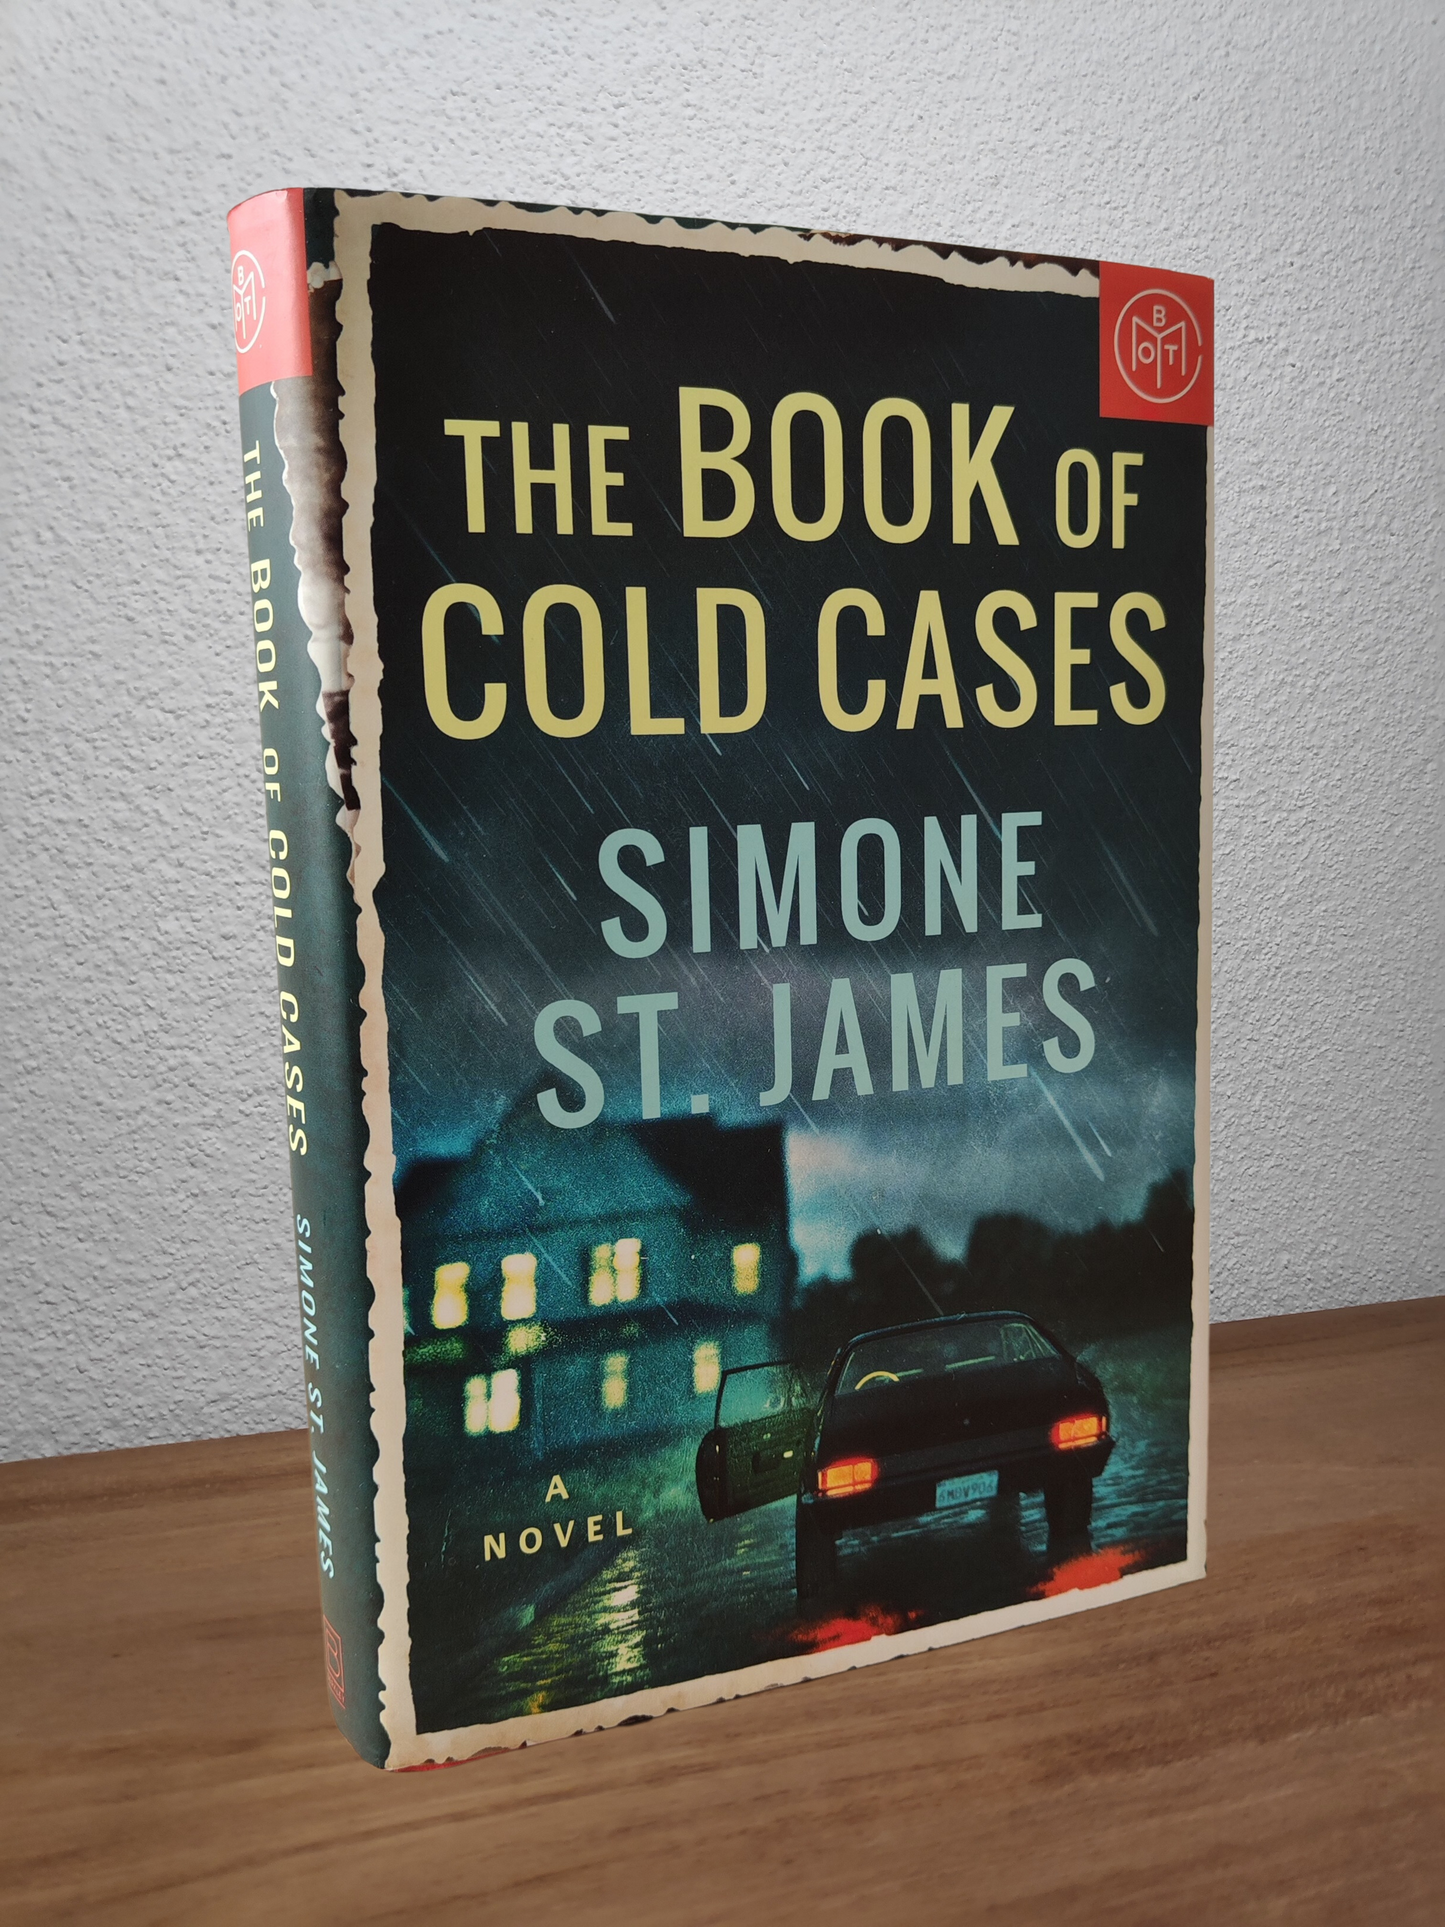 Simone St. James - The Book of Cold Cases - Second-hand english book to deliver in Zurich & Switzerland